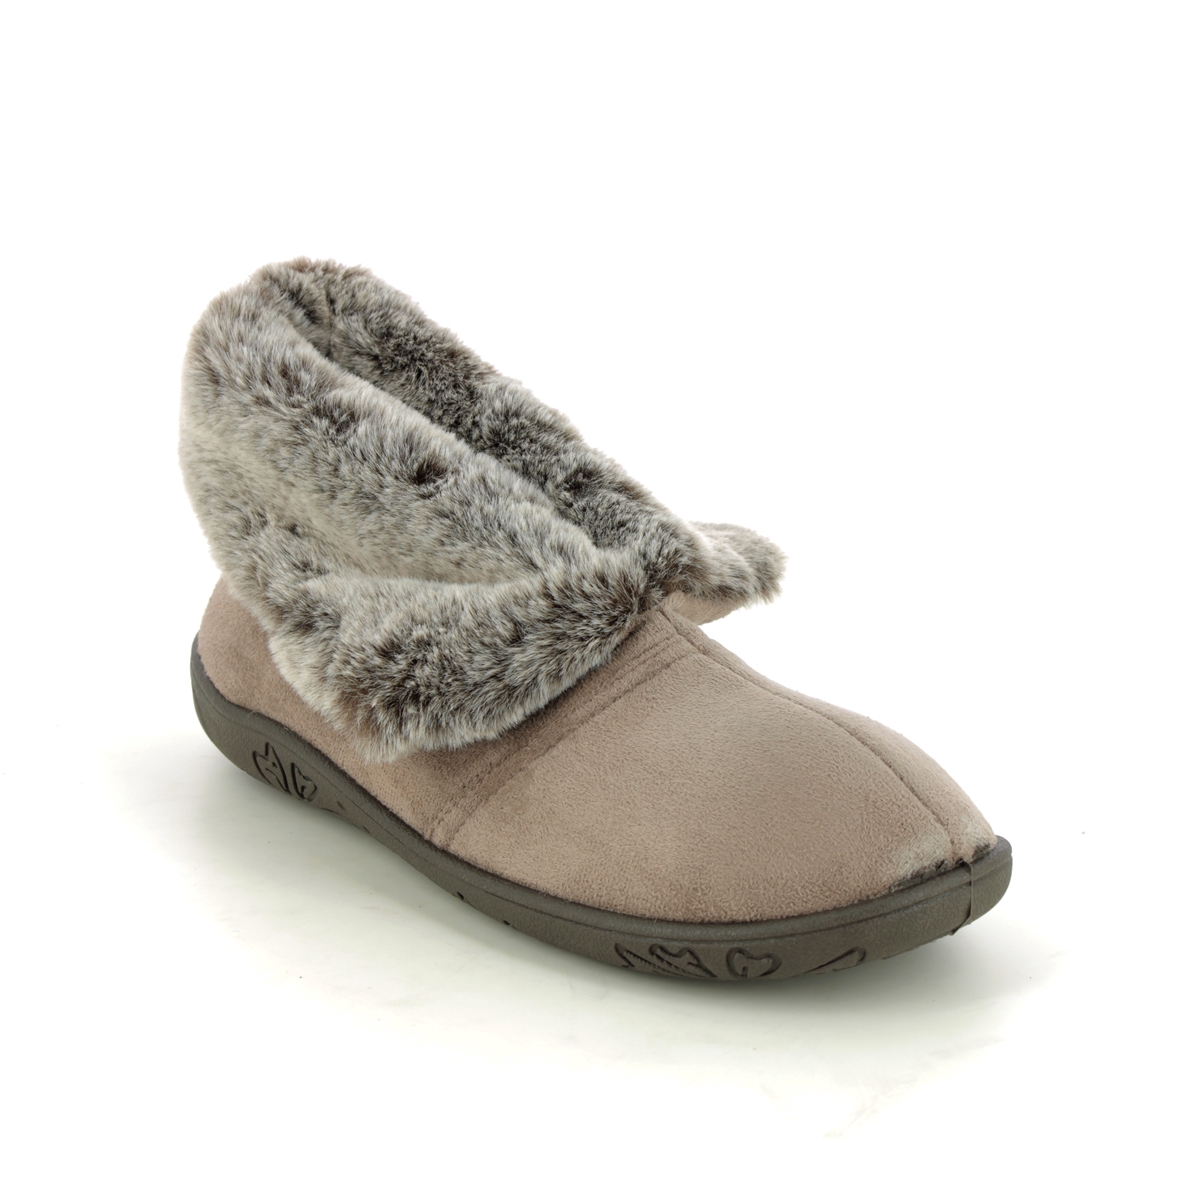 Padders Esme  Ee Fit Taupe Womens slippers 4050-2807 in a Plain Textile in Size 4